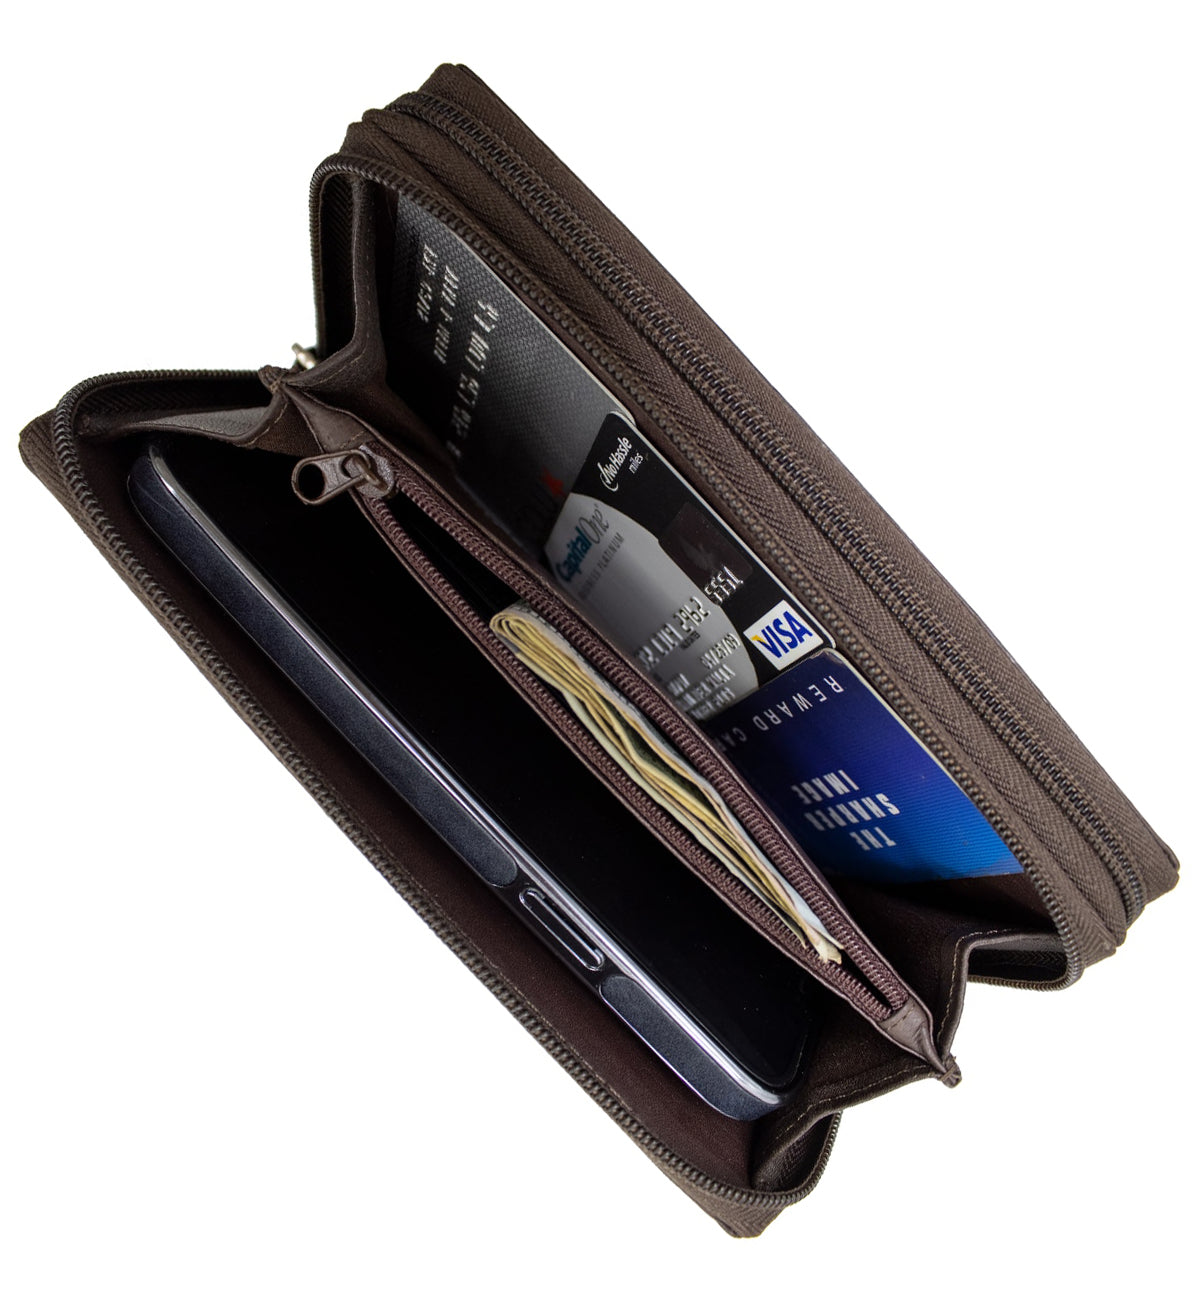 Genuine Leather RFID Accordion Credit Card Holder with Zipper for